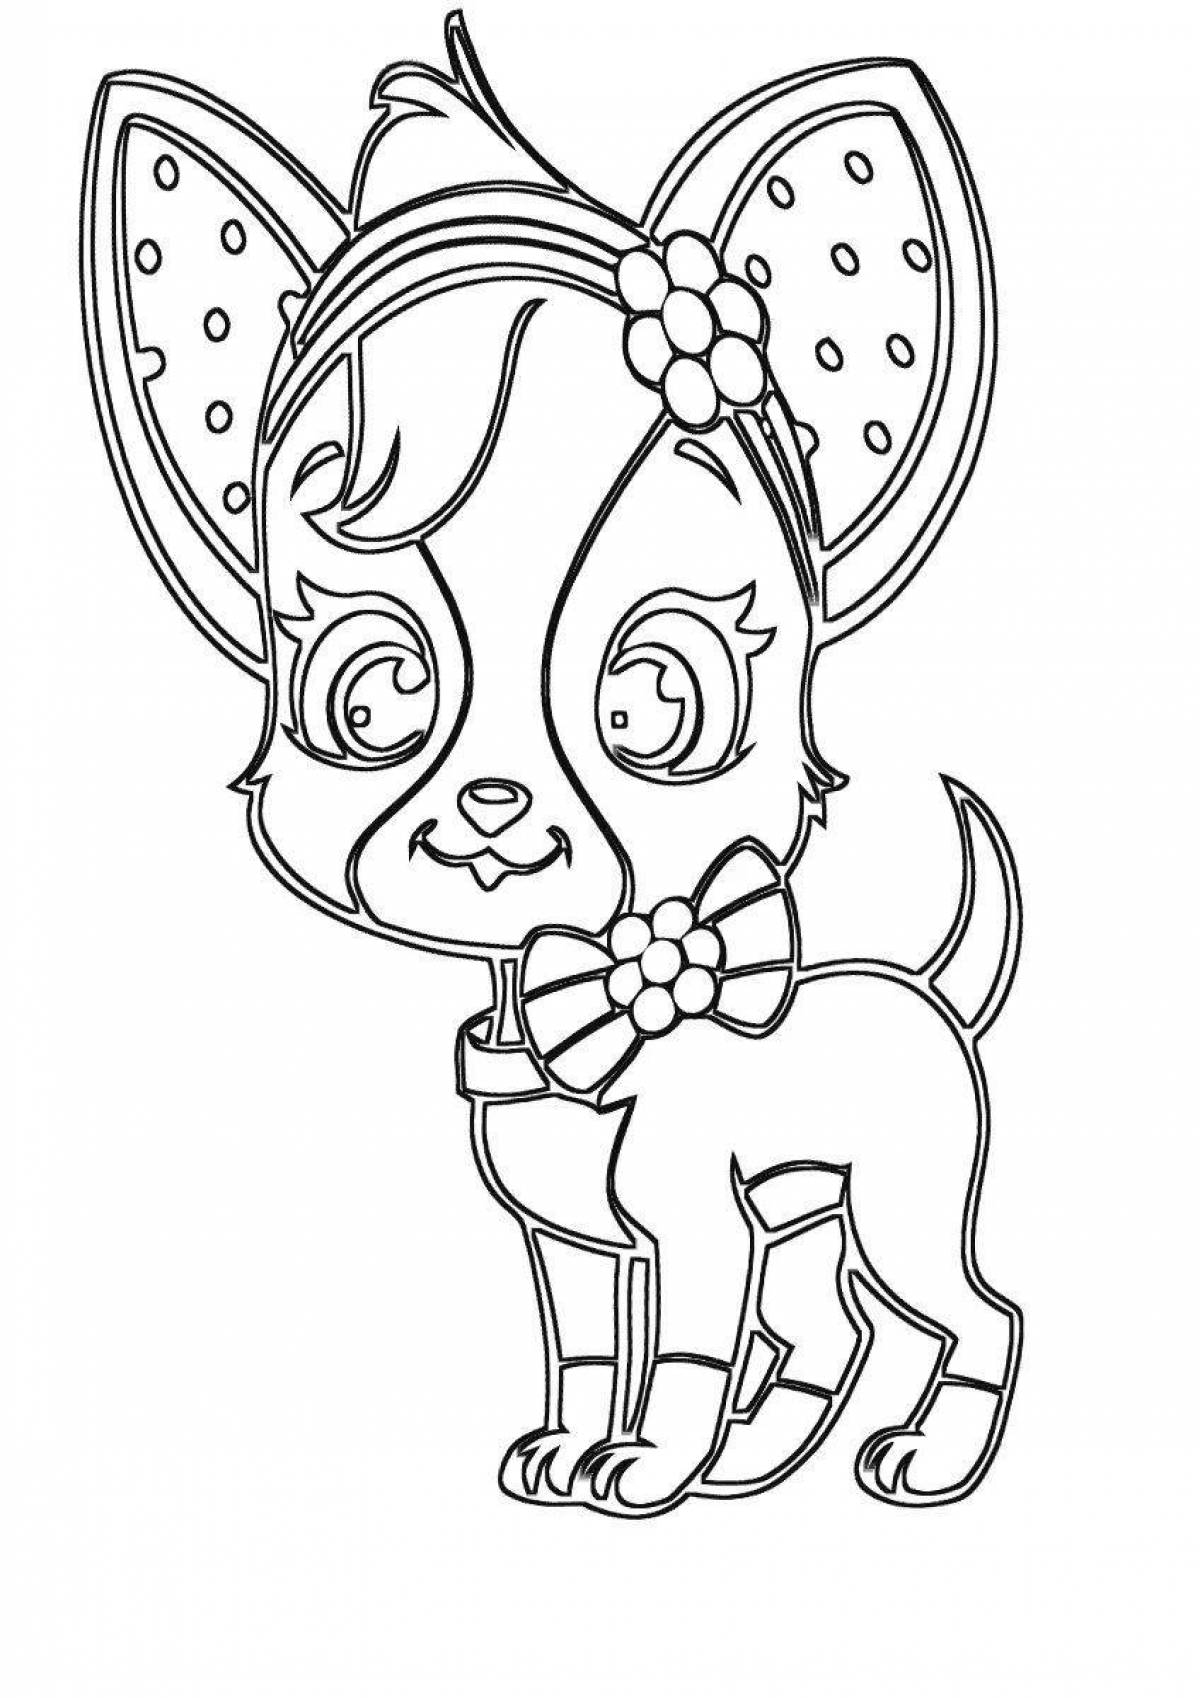 Coloring page playful chihuahua dog